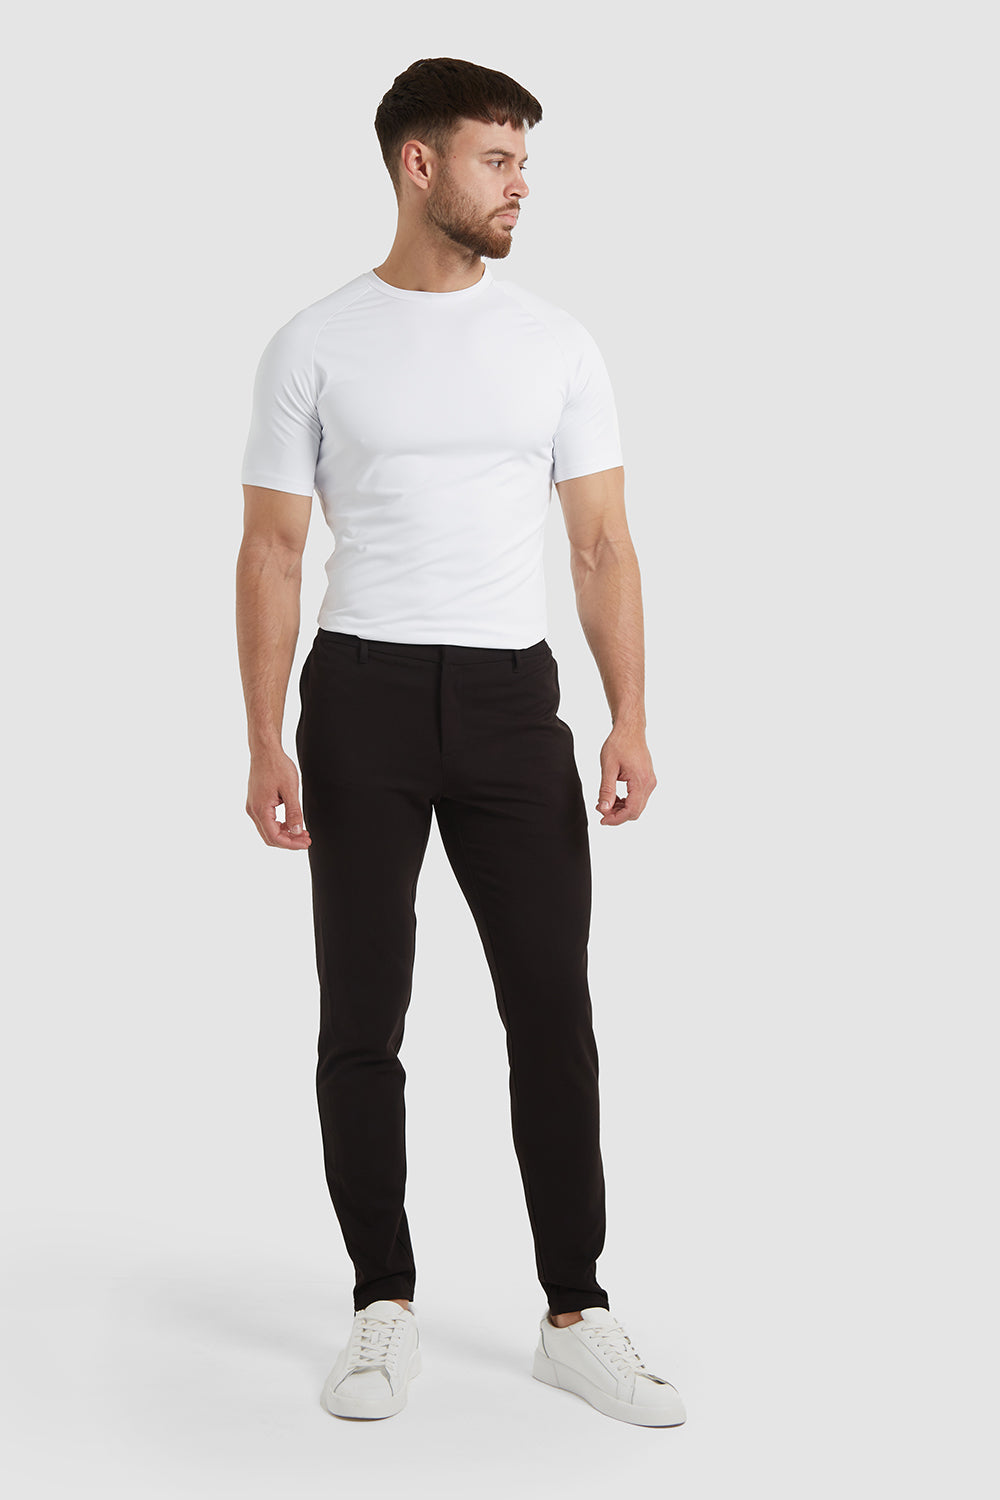 Lowes Tailored Fit Black Trousers - Lowes Menswear